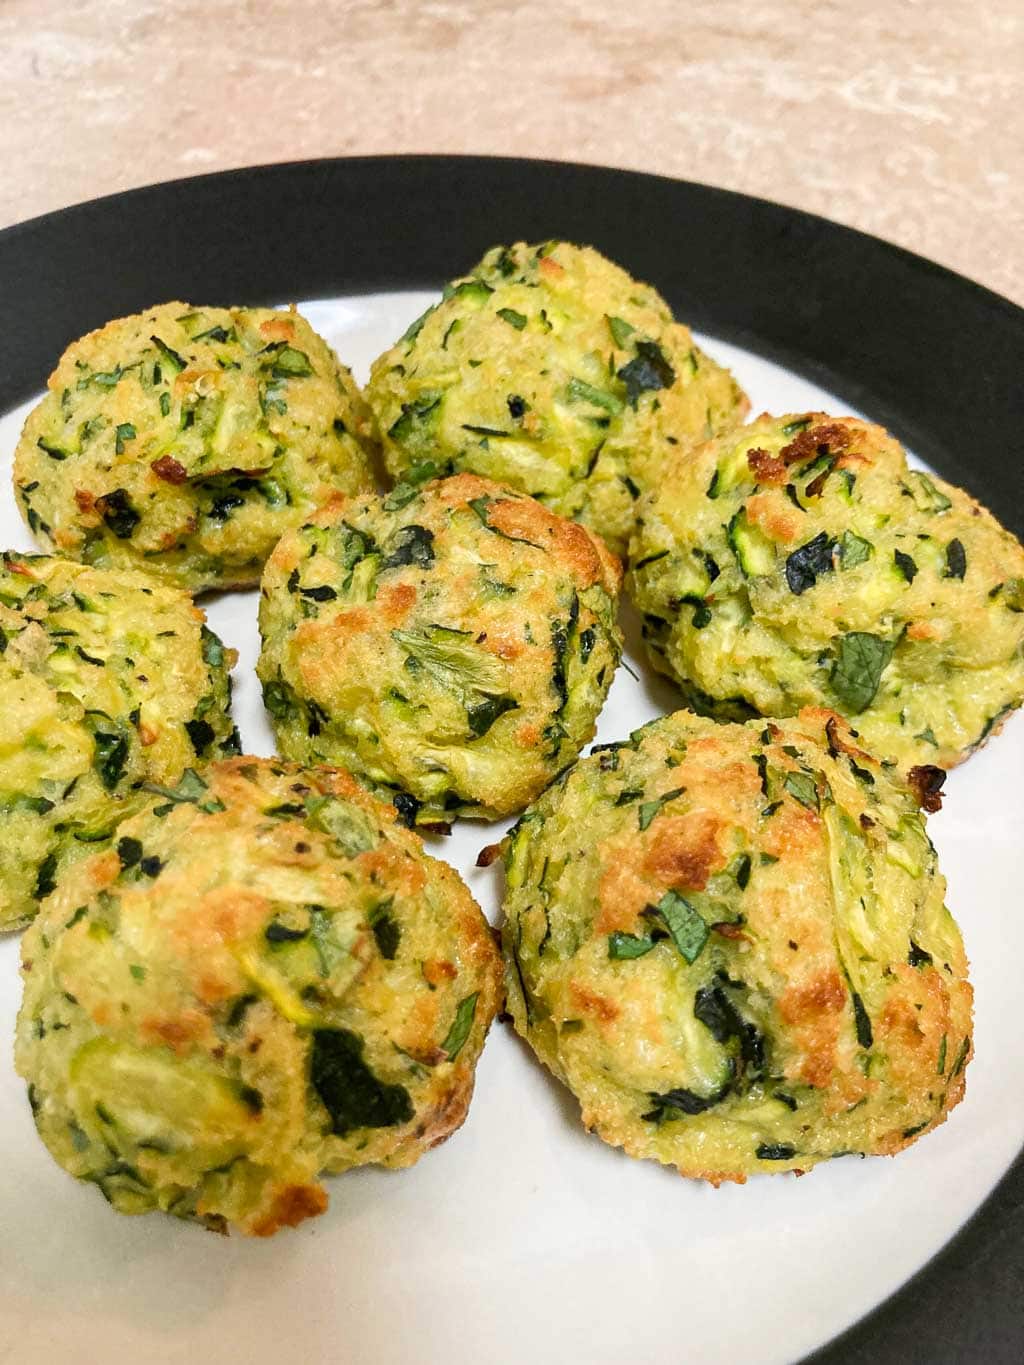 Baked zucchini summer squash balls on a plate